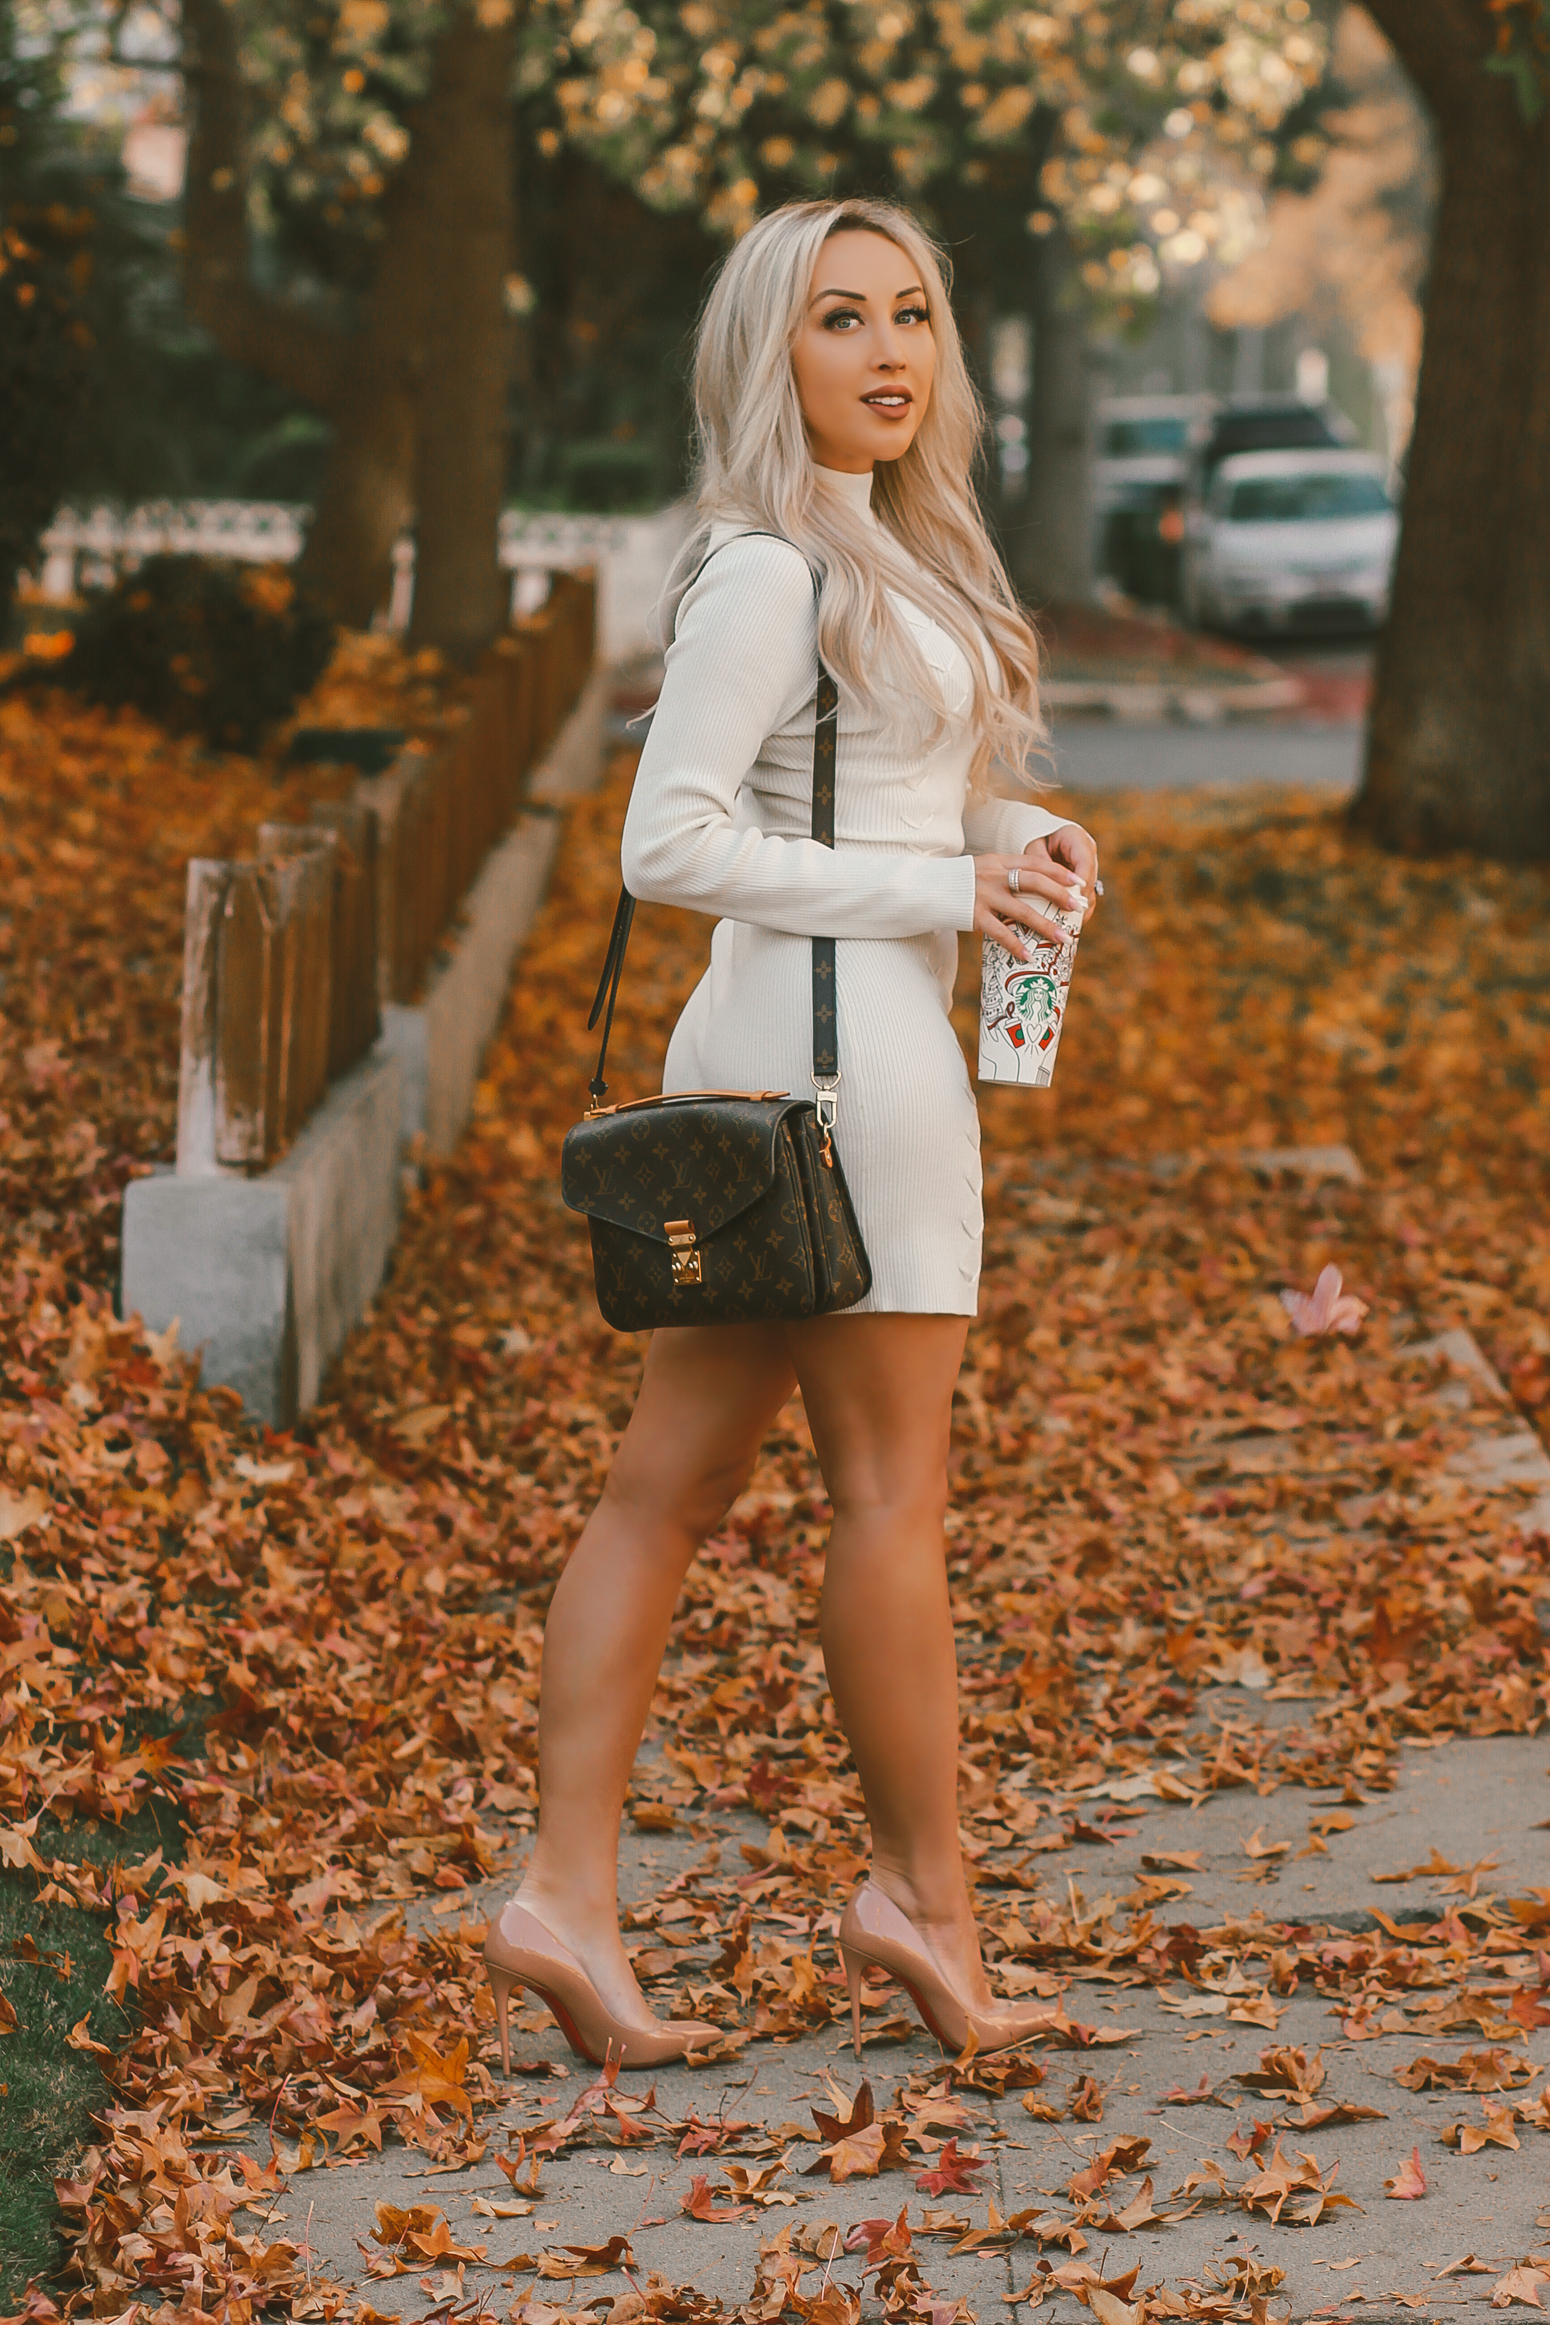 Blondie in the City | Cozy White Sweater Dress | Fall Fashion | Louis Vuitton | Fall Leaves | Louboutin's